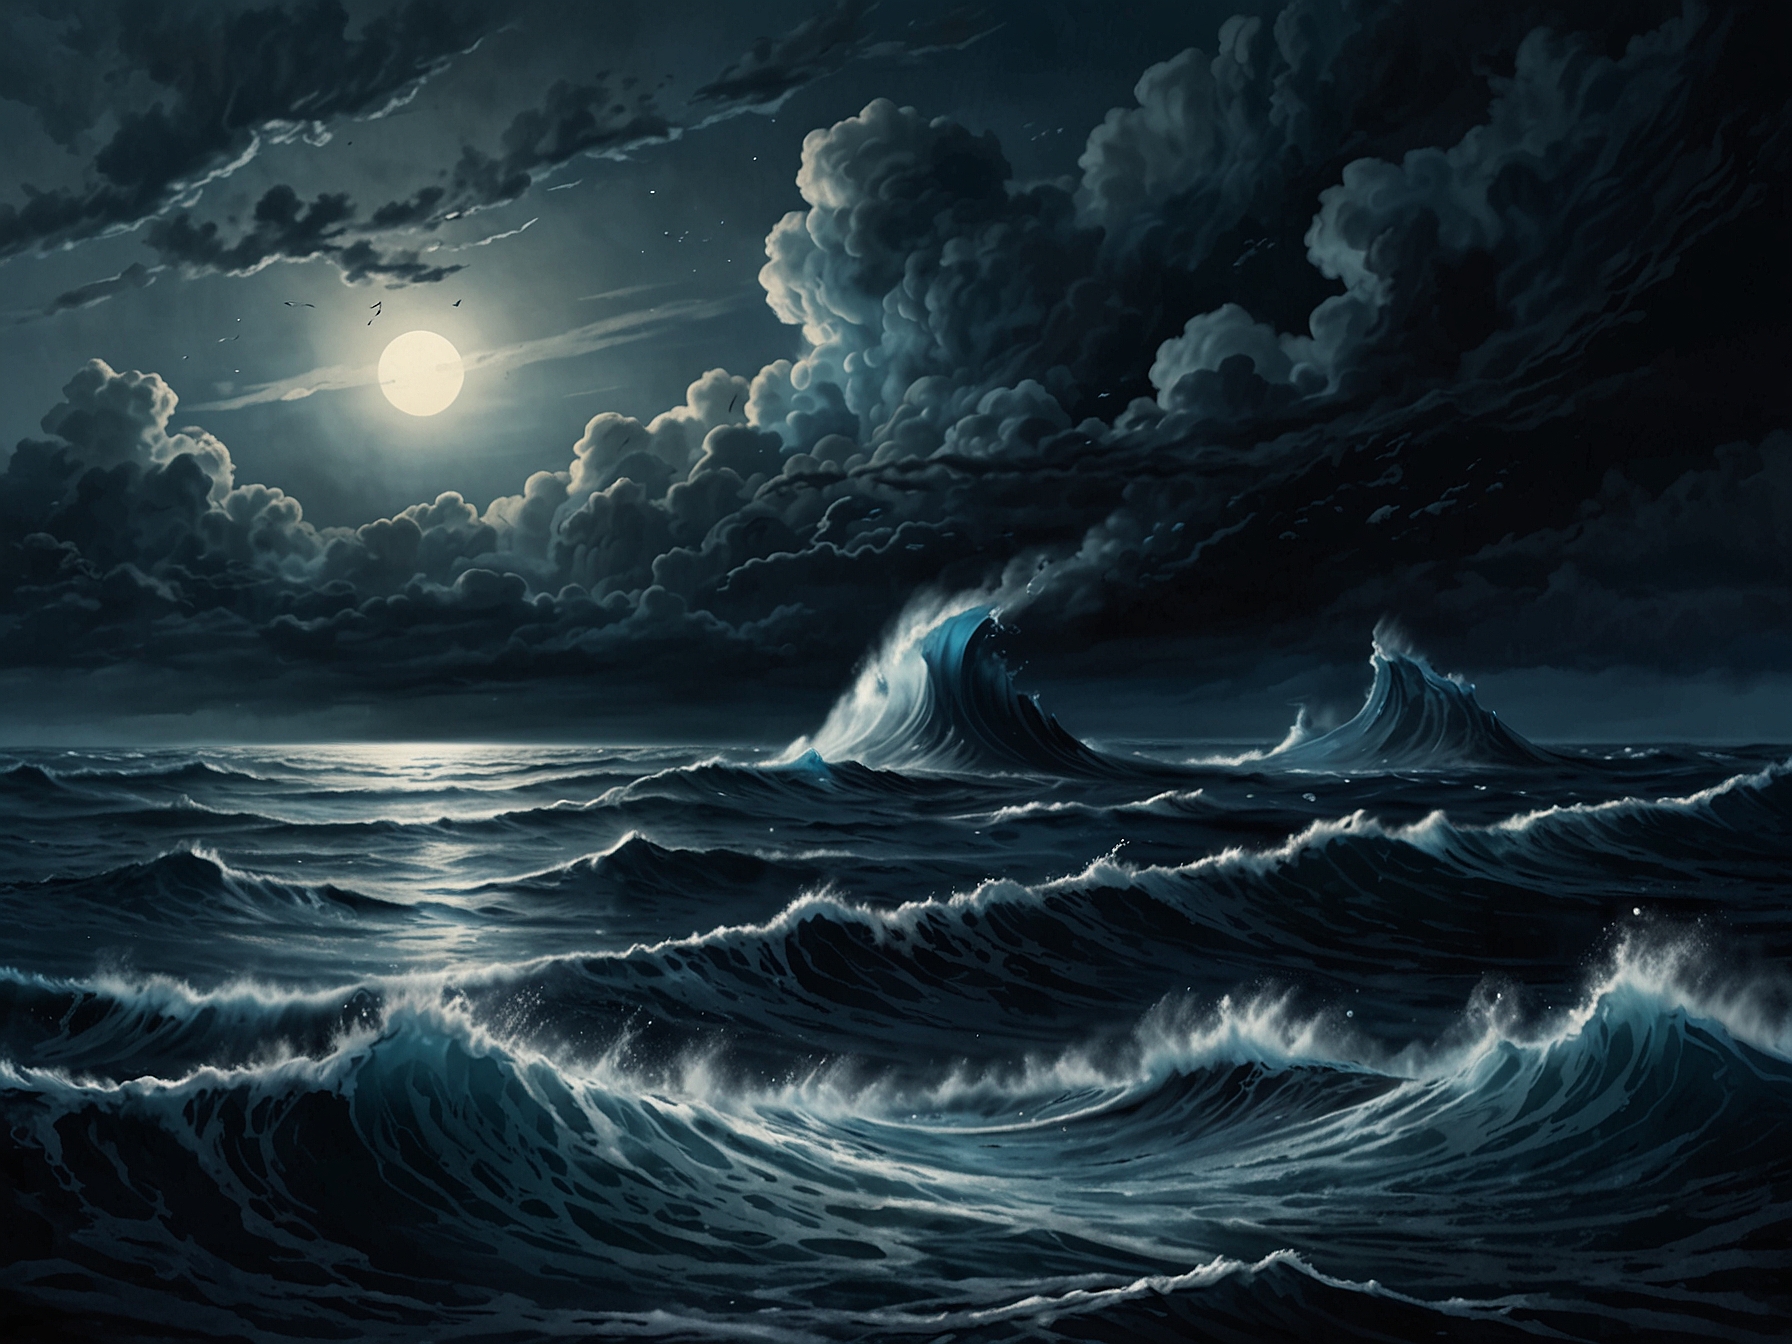 An album cover art of Deep Blue, illustrating a deep, turbulent sea that symbolizes the socio-economic instability and the emotional depth conveyed through the music.